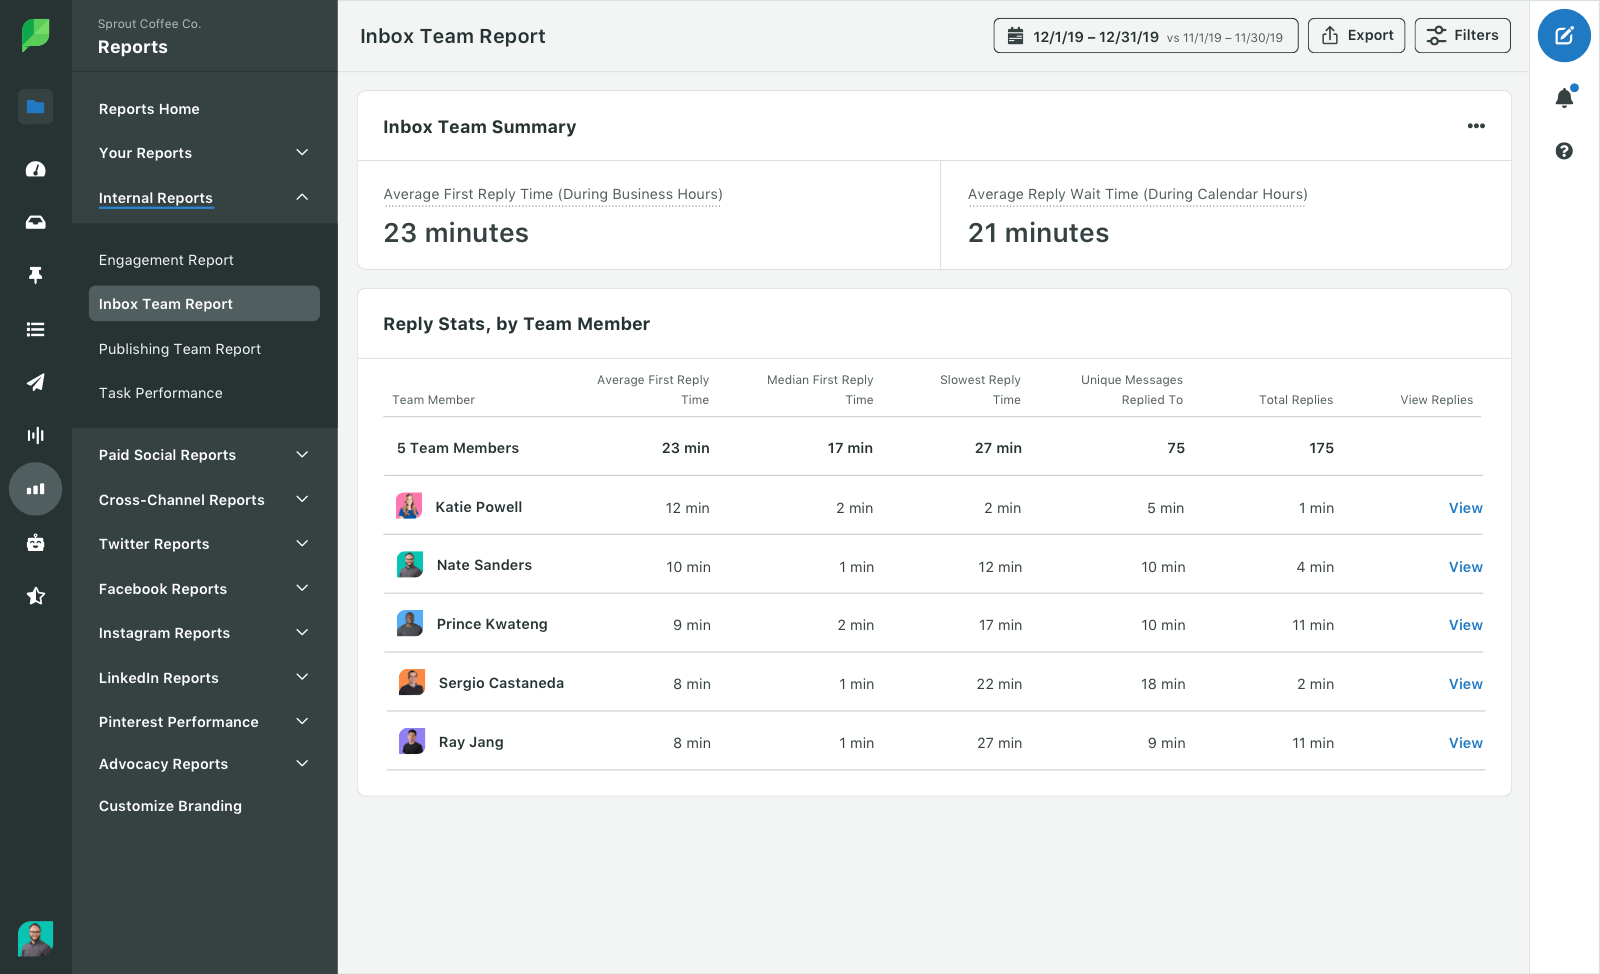 Screenshot of the Sprout Social Inbox Team Report that shows reply stats, by team member and an Inbox Team summary of average first reply time and wait time.